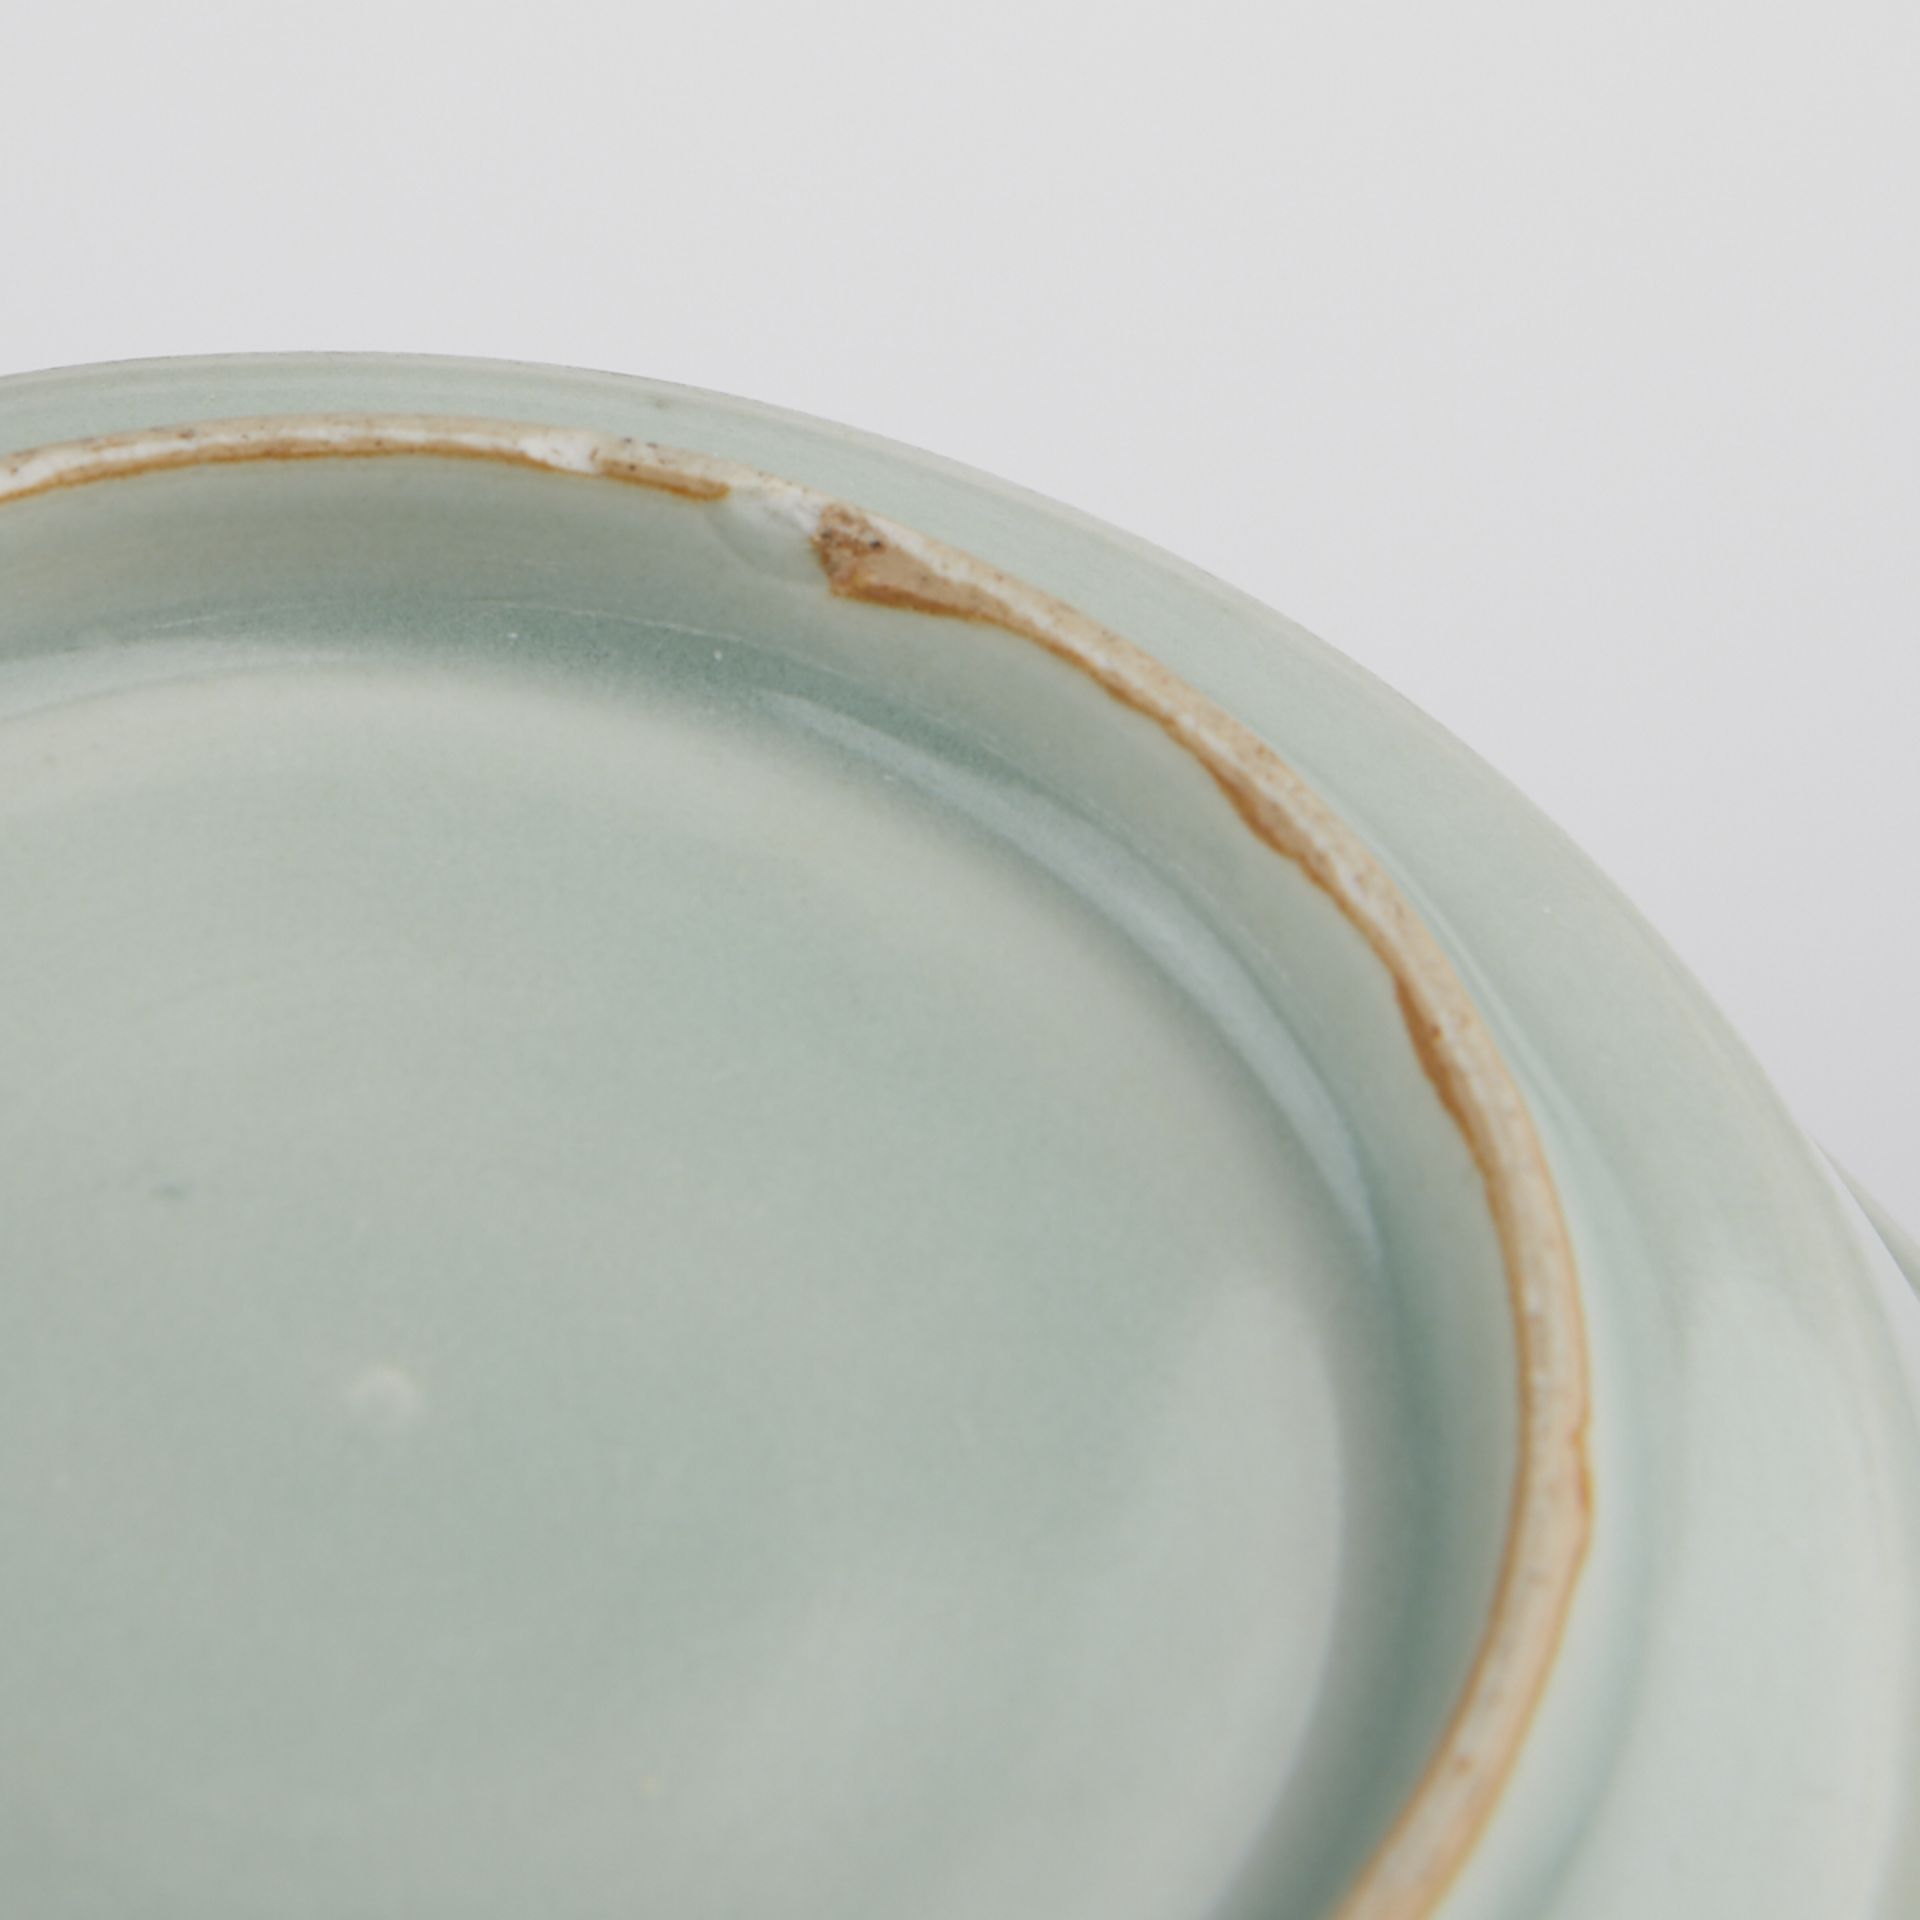 Early Chinese Celadon Porcelain Bowl - Likely Yuan - Image 6 of 9